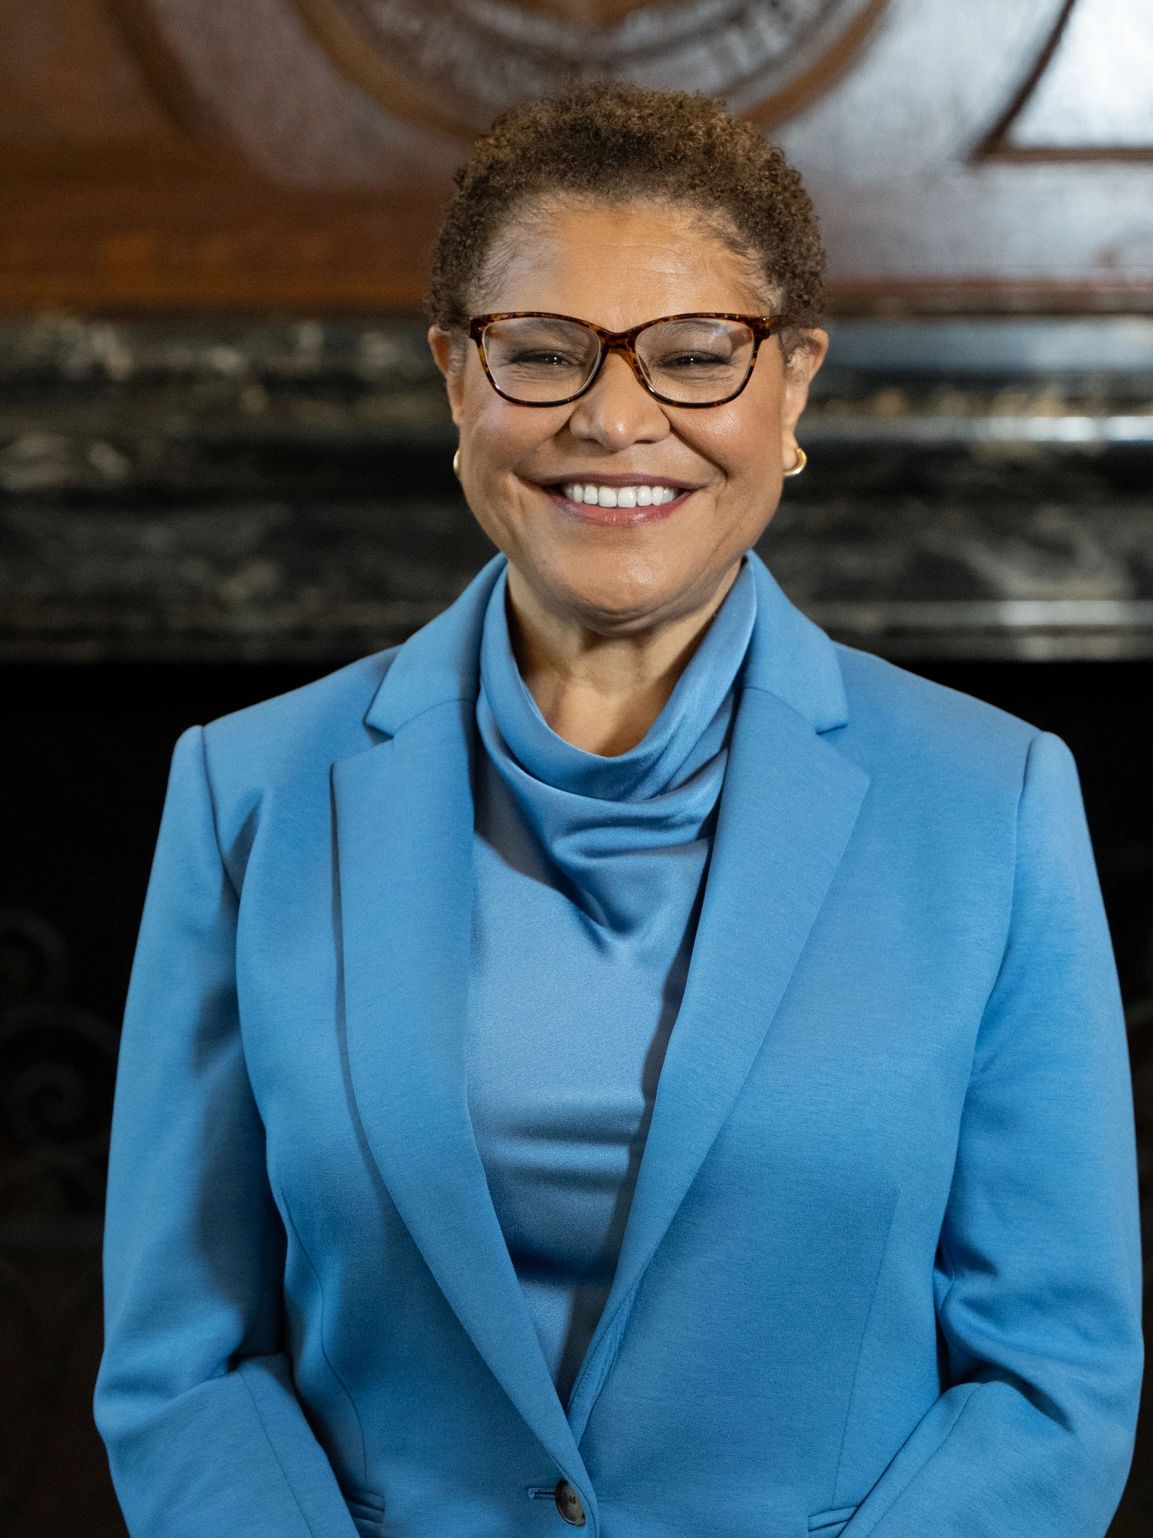 Karen Bass is the 43rd Mayor of Los Angeles and the first woman and second African American to be el